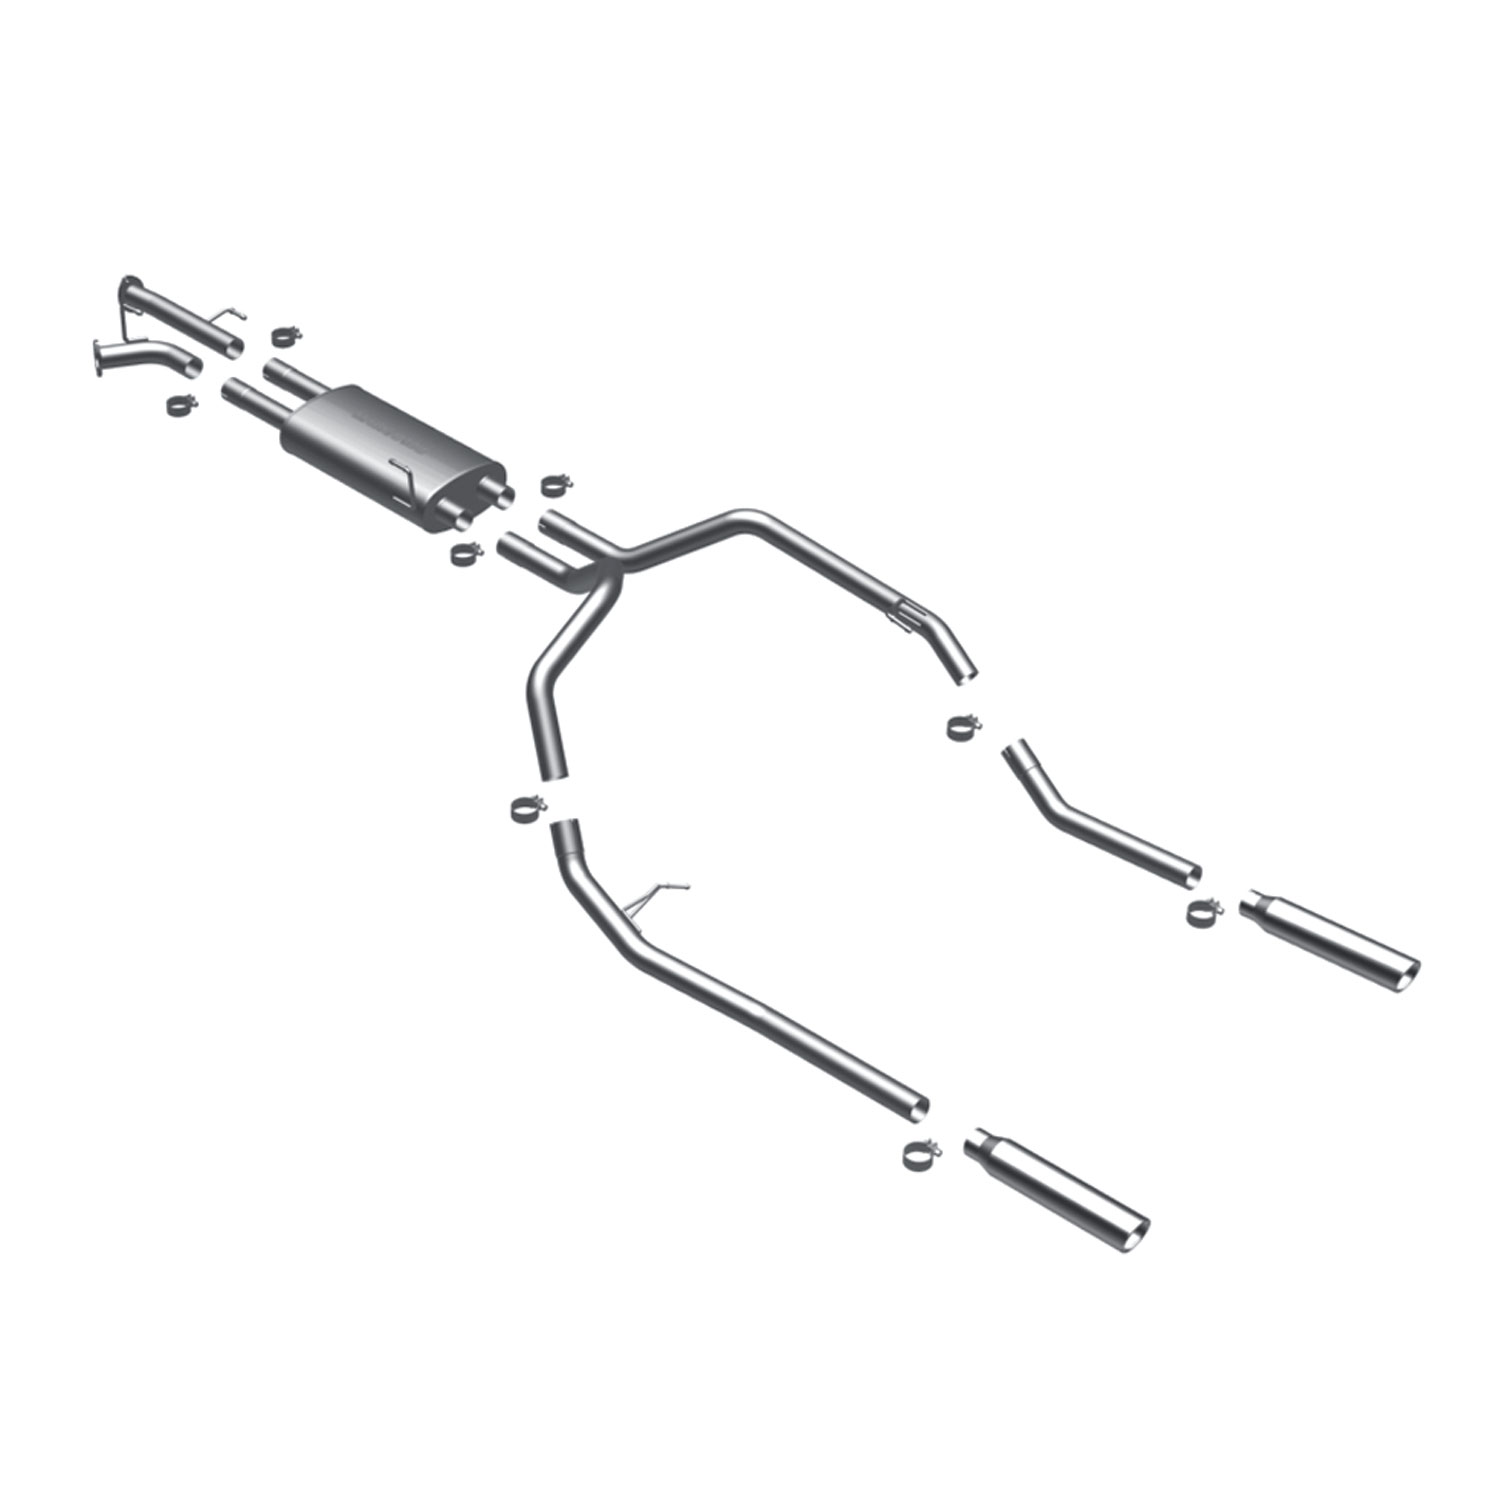 MF Series Cat-Back Exhaust System 2007-08 Tundra 5.7L (Standard Cab, 78.7" Bed)